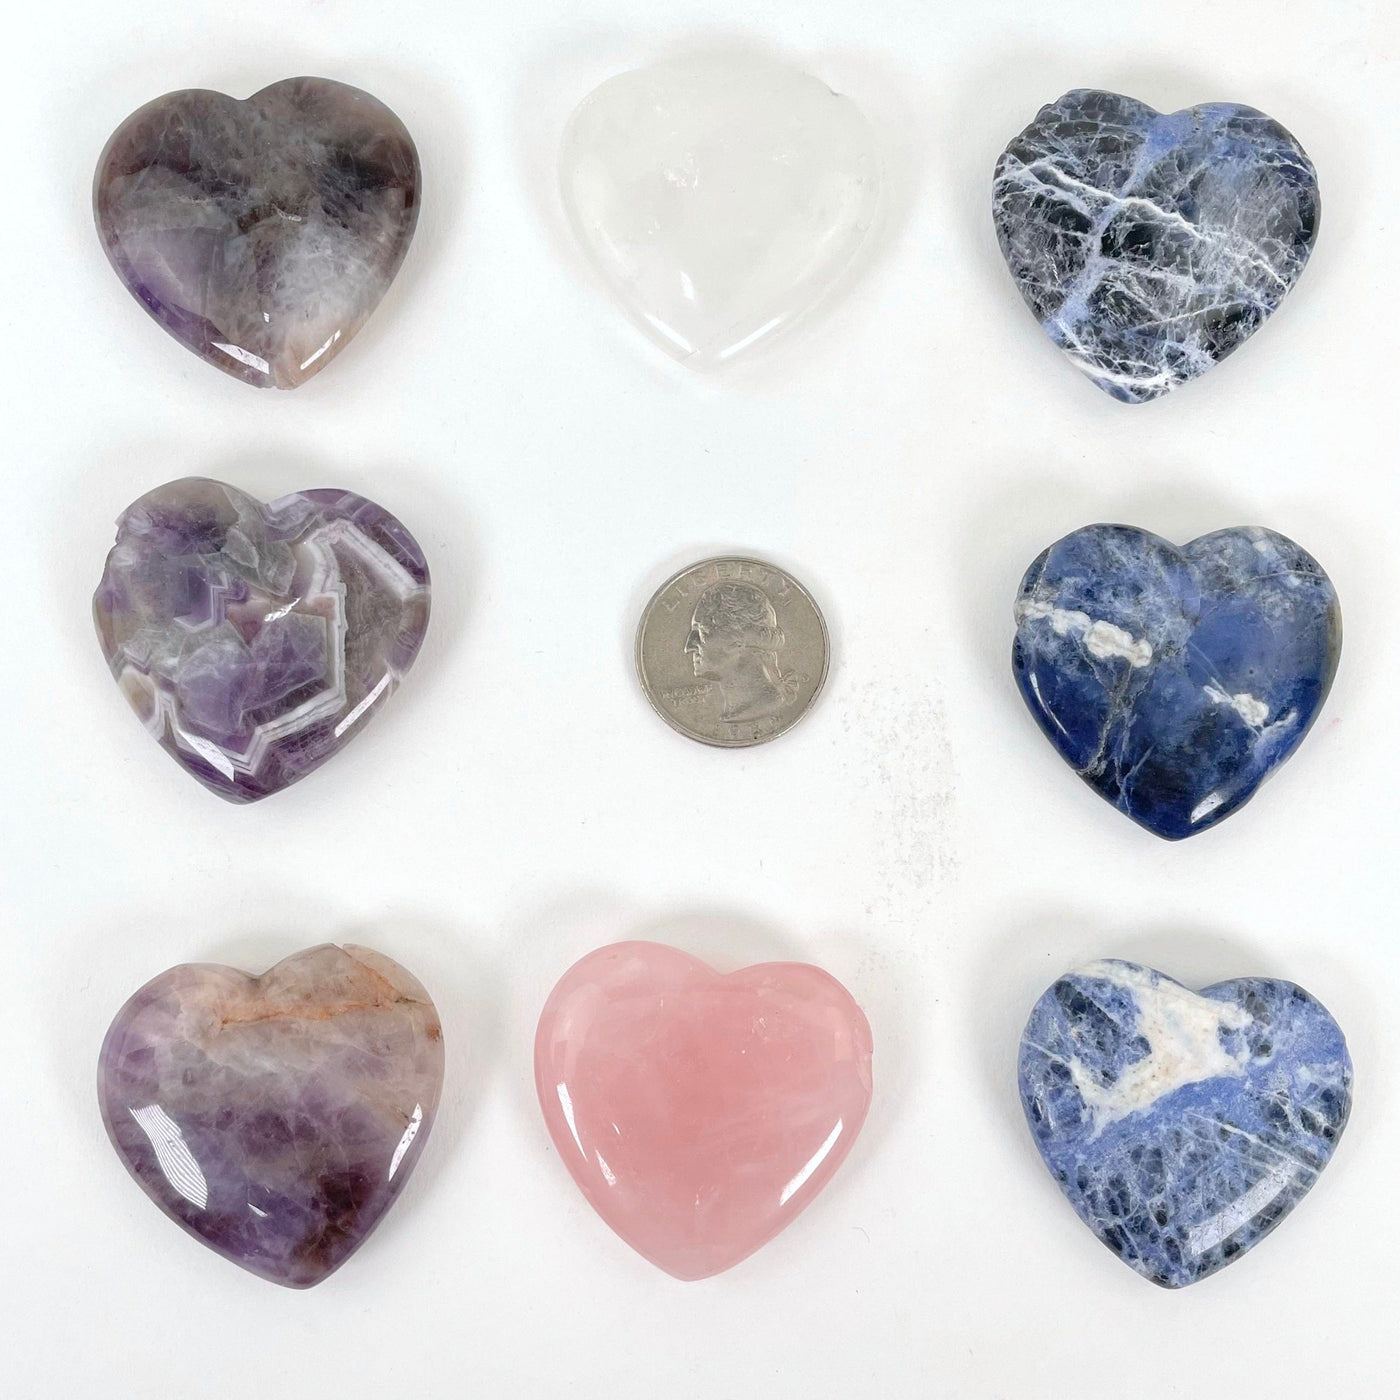 all polished heart stone options laying flat with quarter for size reference